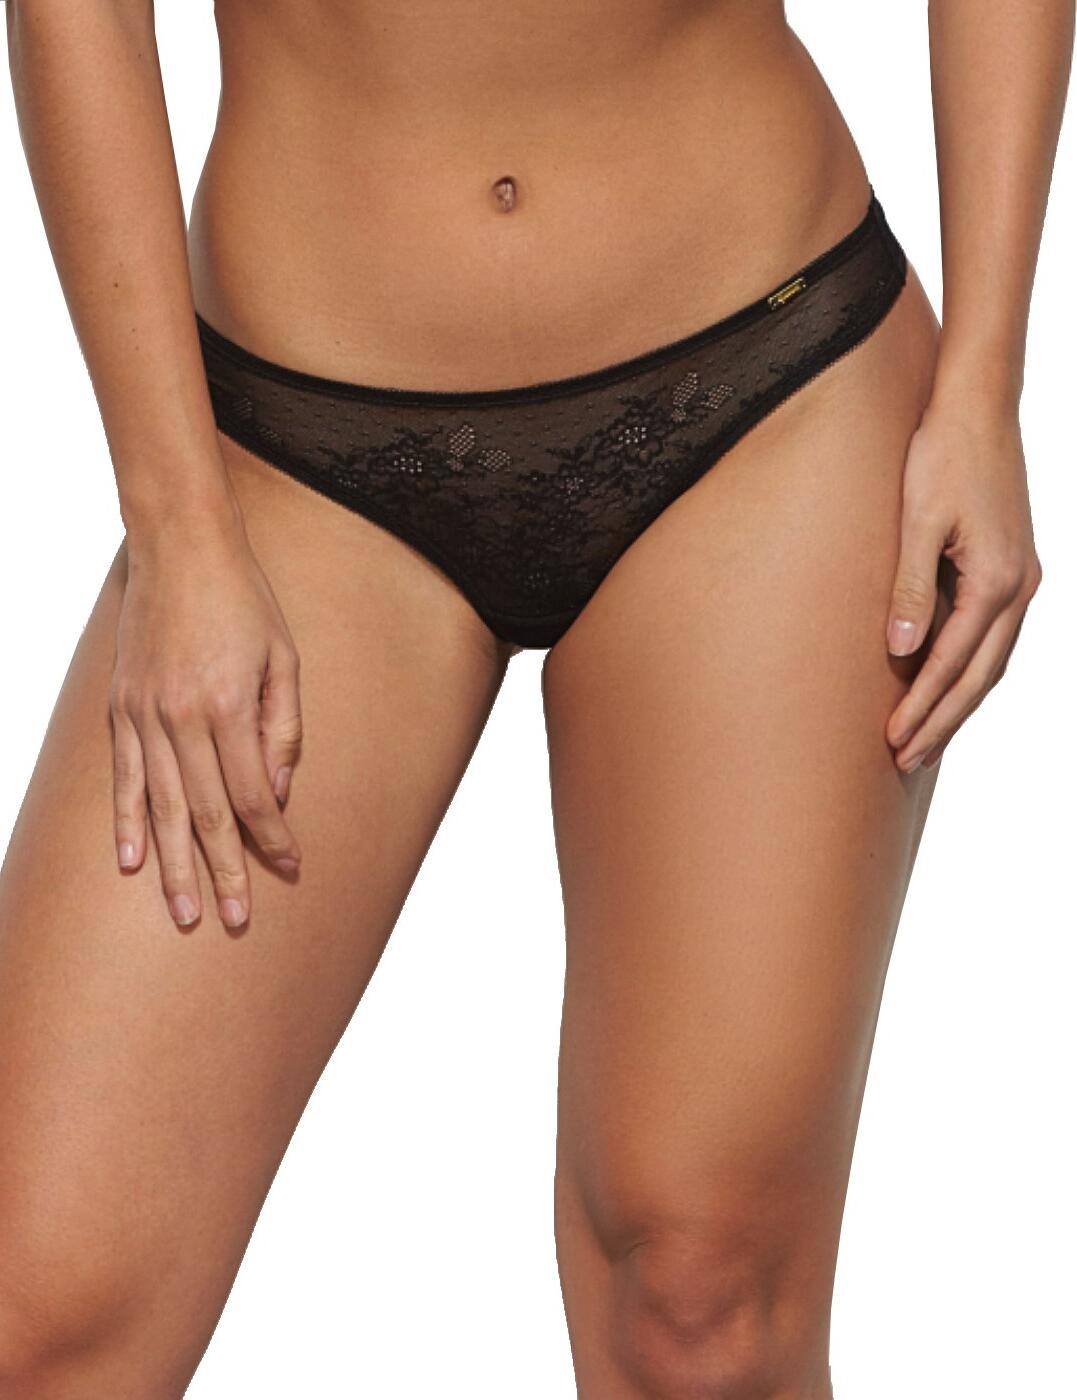 Gossard Glossies Lace Thong - Belle Lingerie